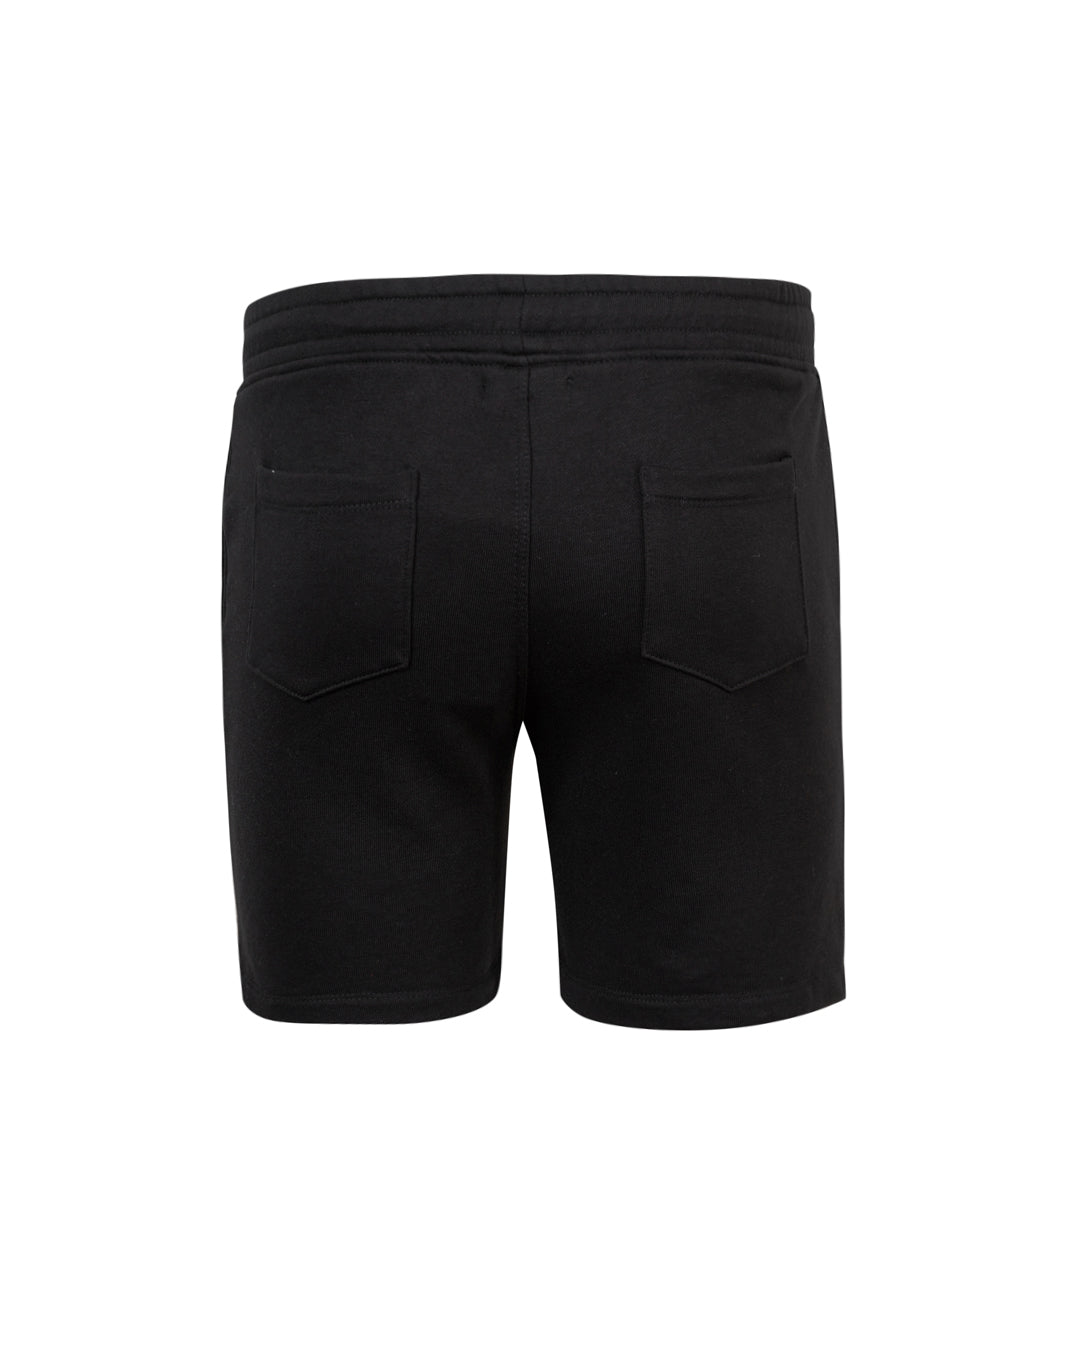 FRENCH TERRY BLACK SHORT